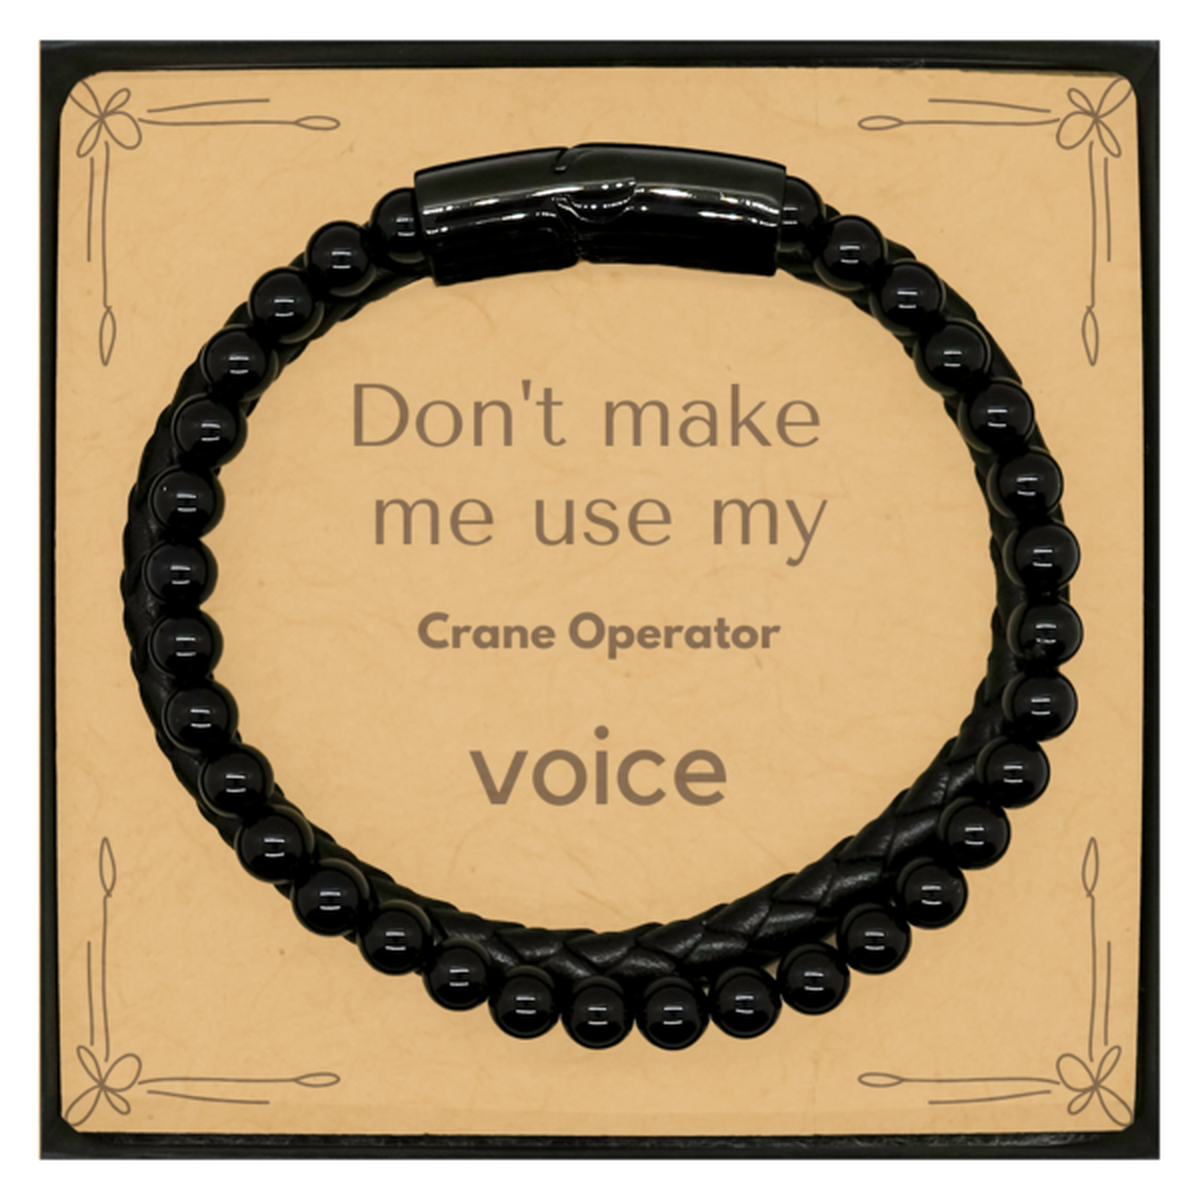 Don't make me use my Crane Operator voice, Sarcasm Crane Operator Card Gifts, Christmas Crane Operator Stone Leather Bracelets Birthday Unique Gifts For Crane Operator Coworkers, Men, Women, Colleague, Friends